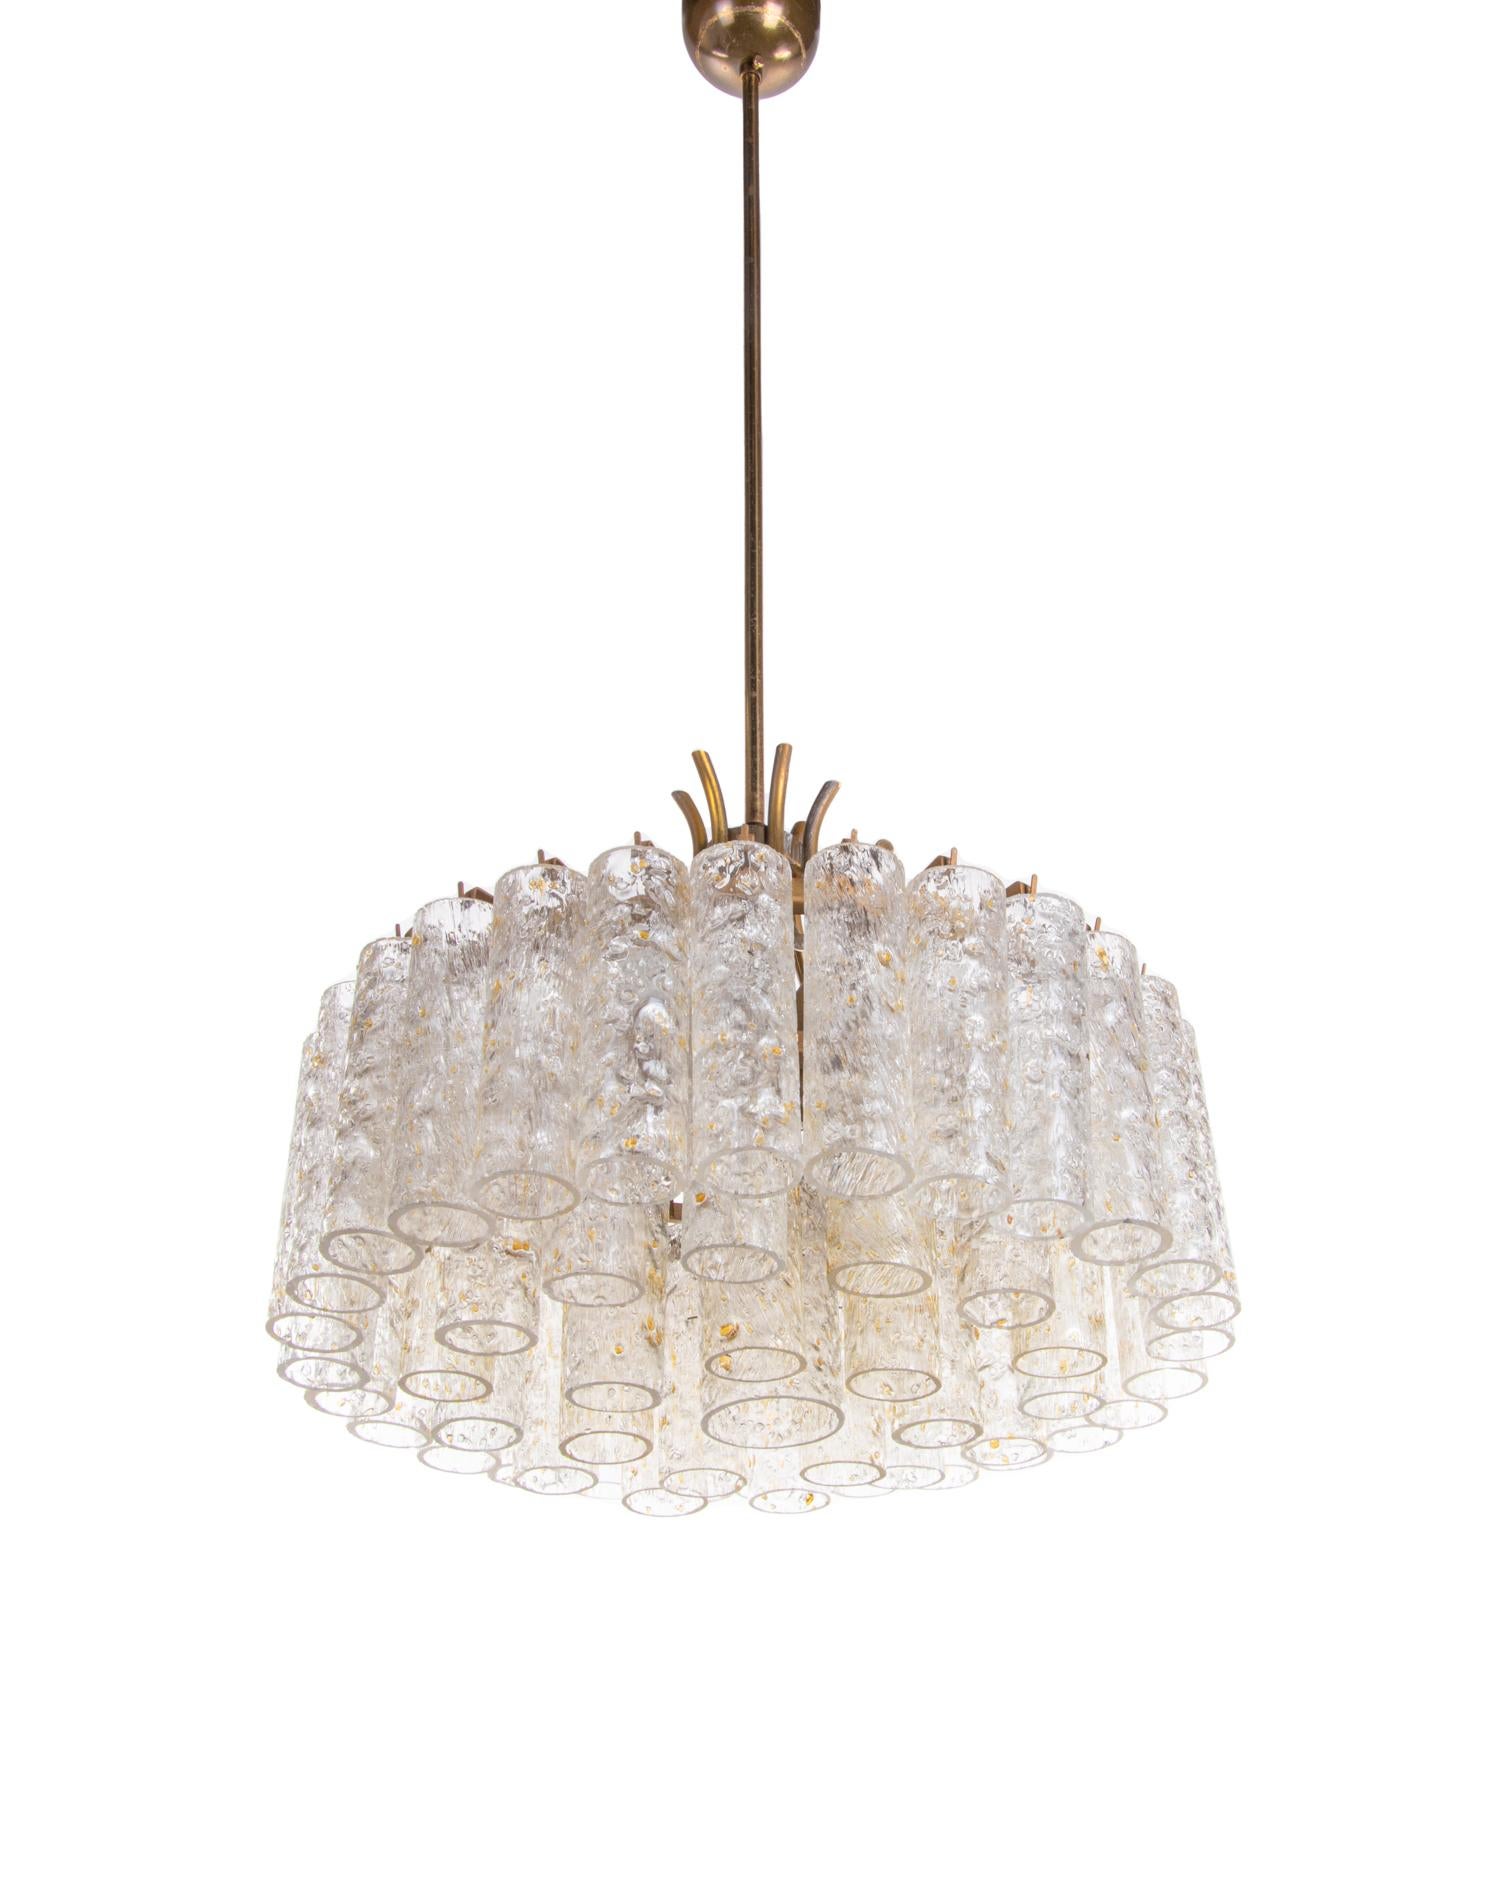 Mid-Century Modern Chandelier with Gold Flaked Murano Glass Tubes & Brass by Doria, Germany, 1960s For Sale